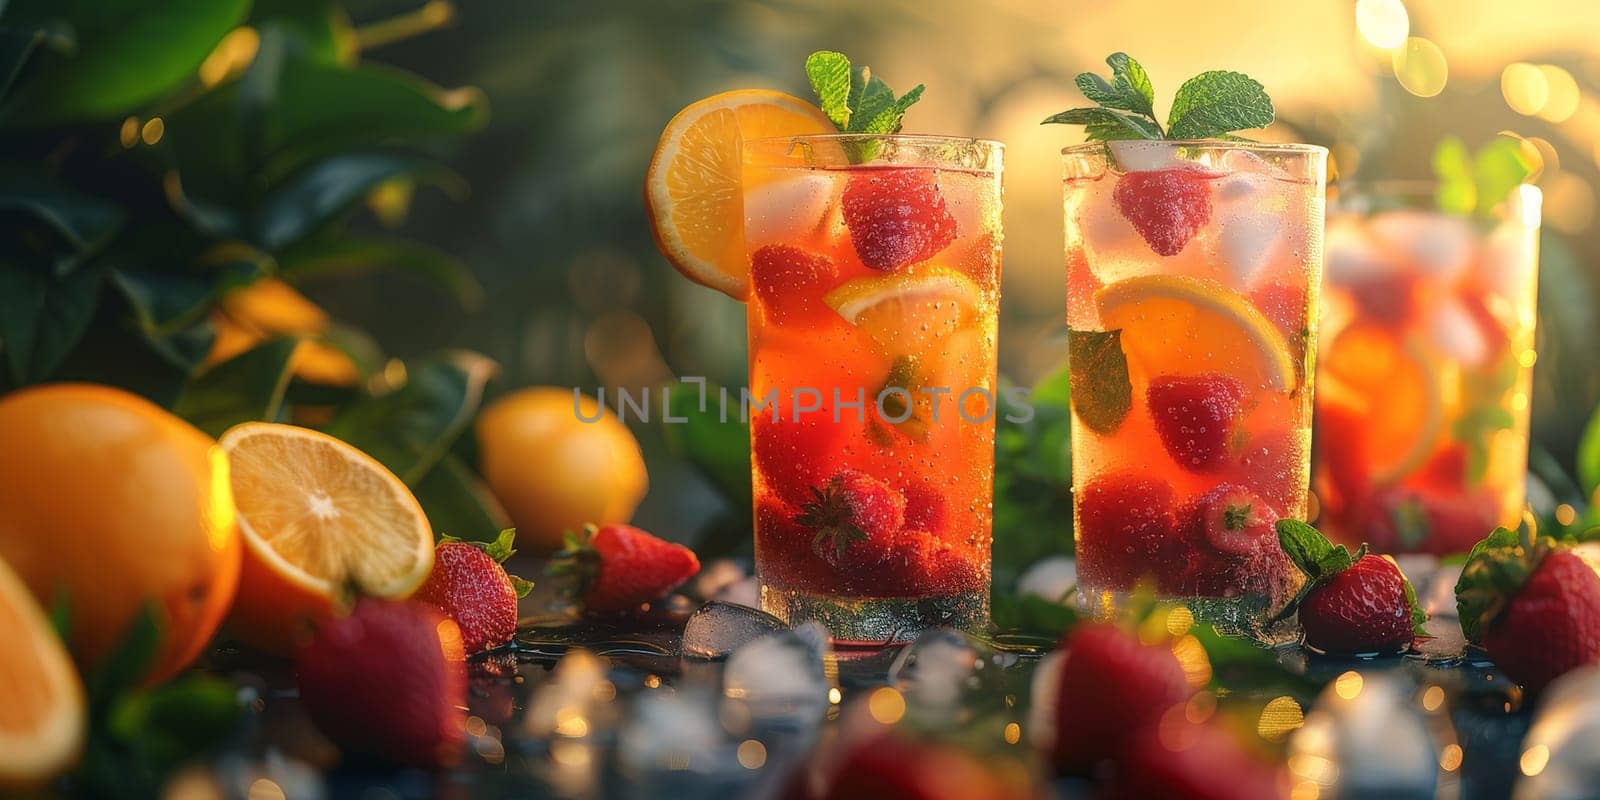 A glass of fruit punch with a strawberry garnish sits on a table next to a glass by nateemee